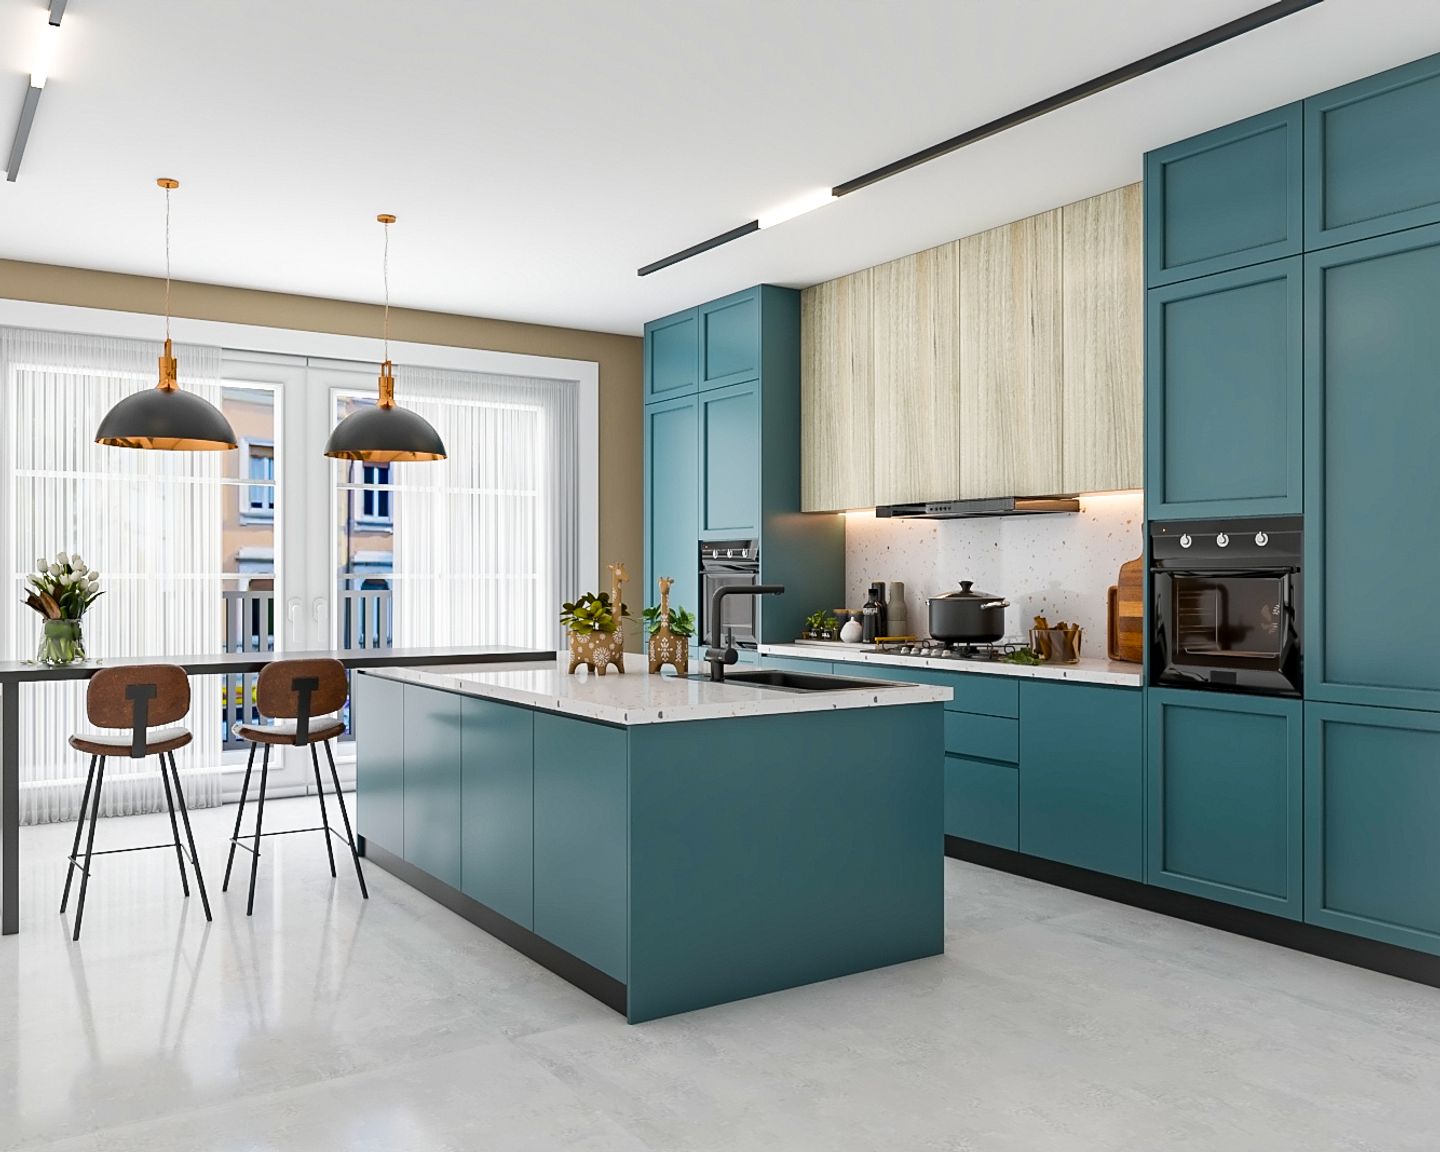 Island Kitchen Design With Teal Blue And Wood Cabinets - Livspace